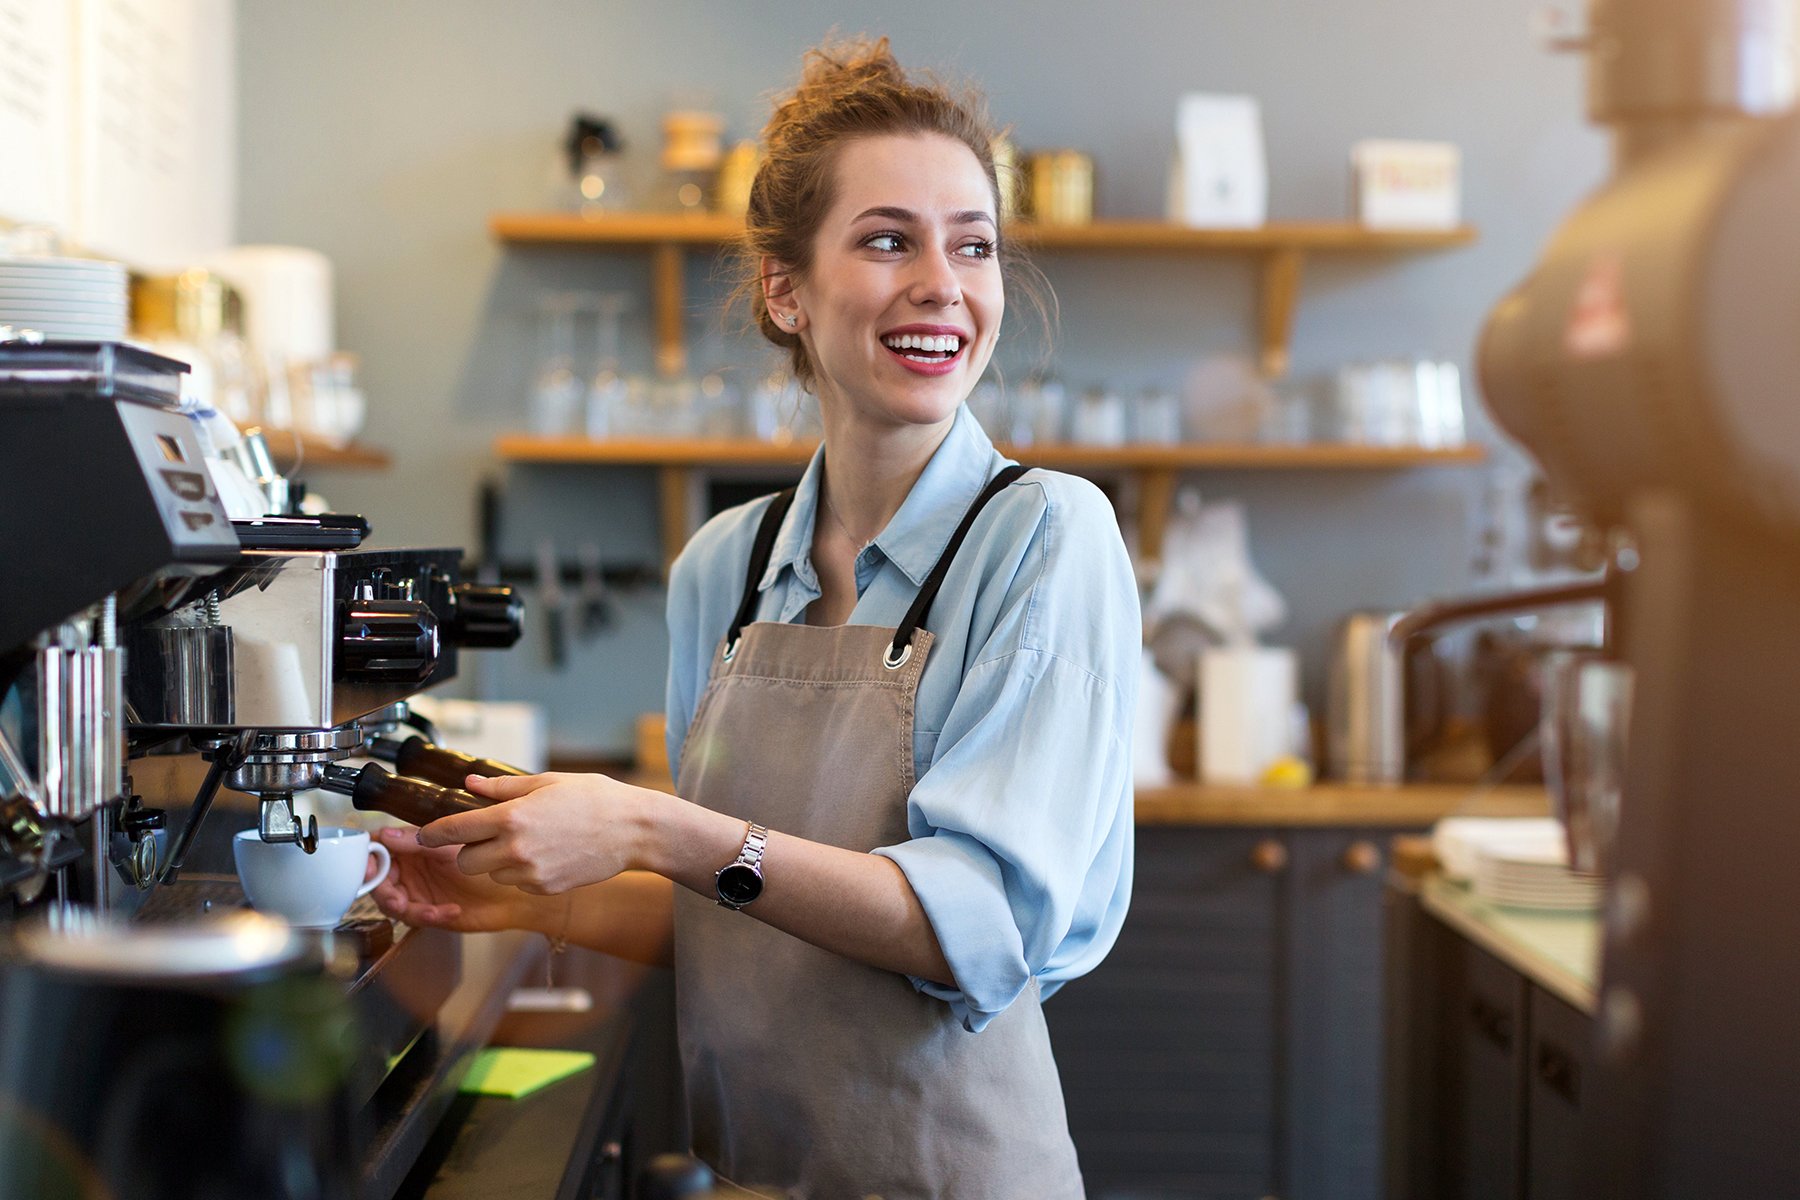 How to hire baristas & build your team